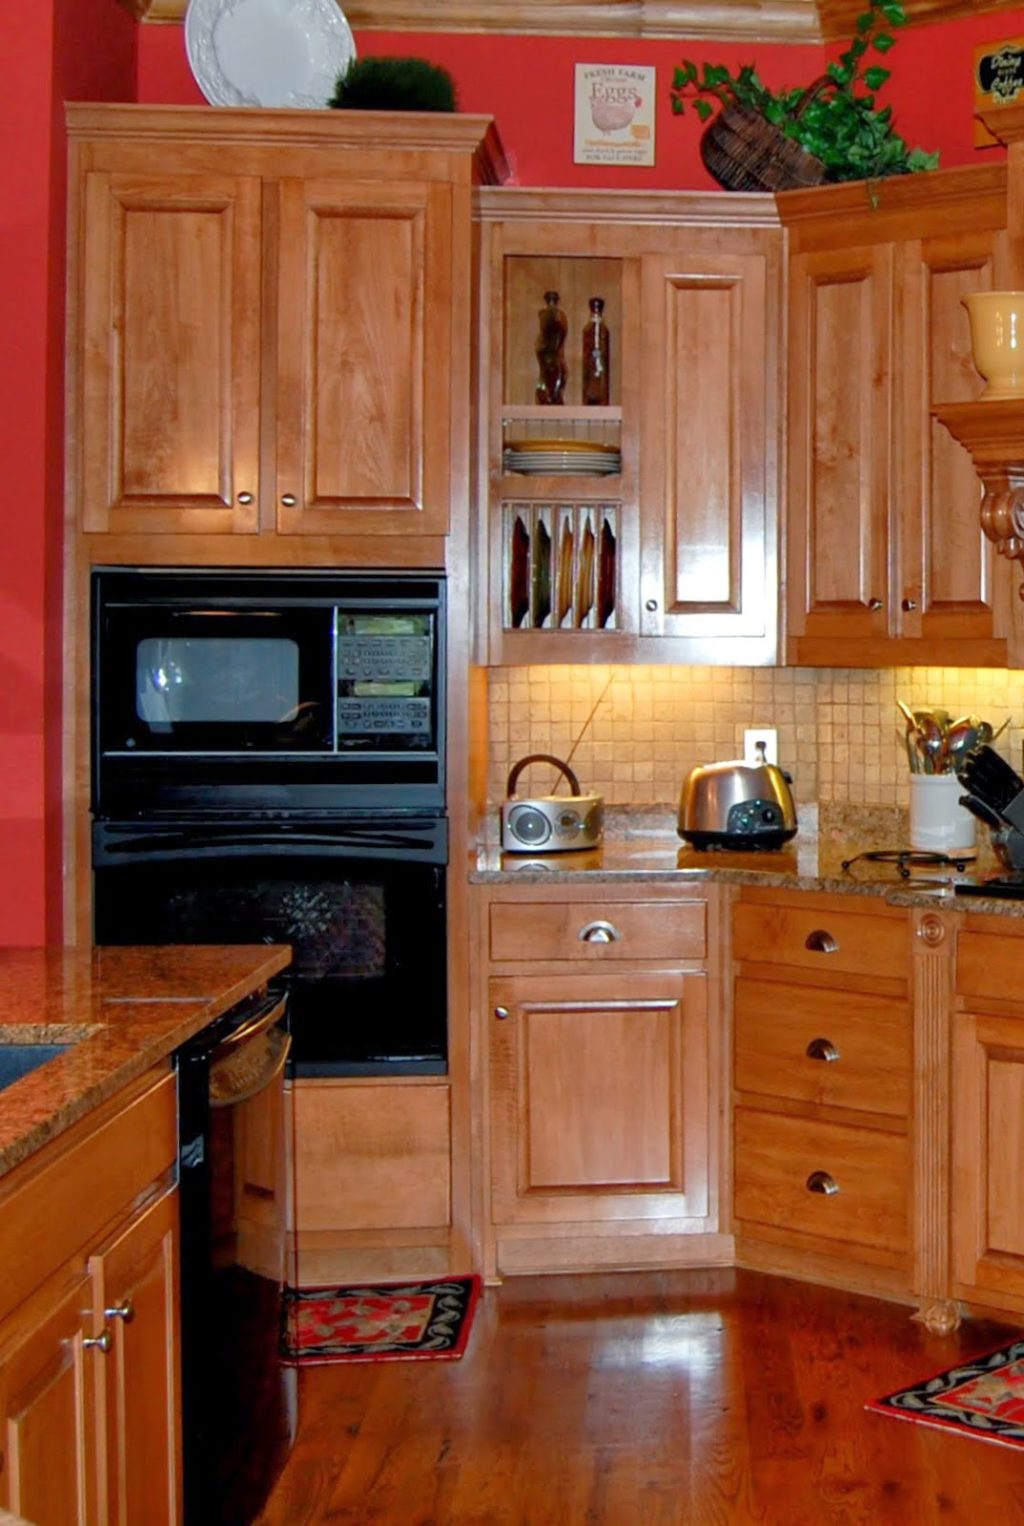 maple wood cabinets and red walls .kitchen from early 2000